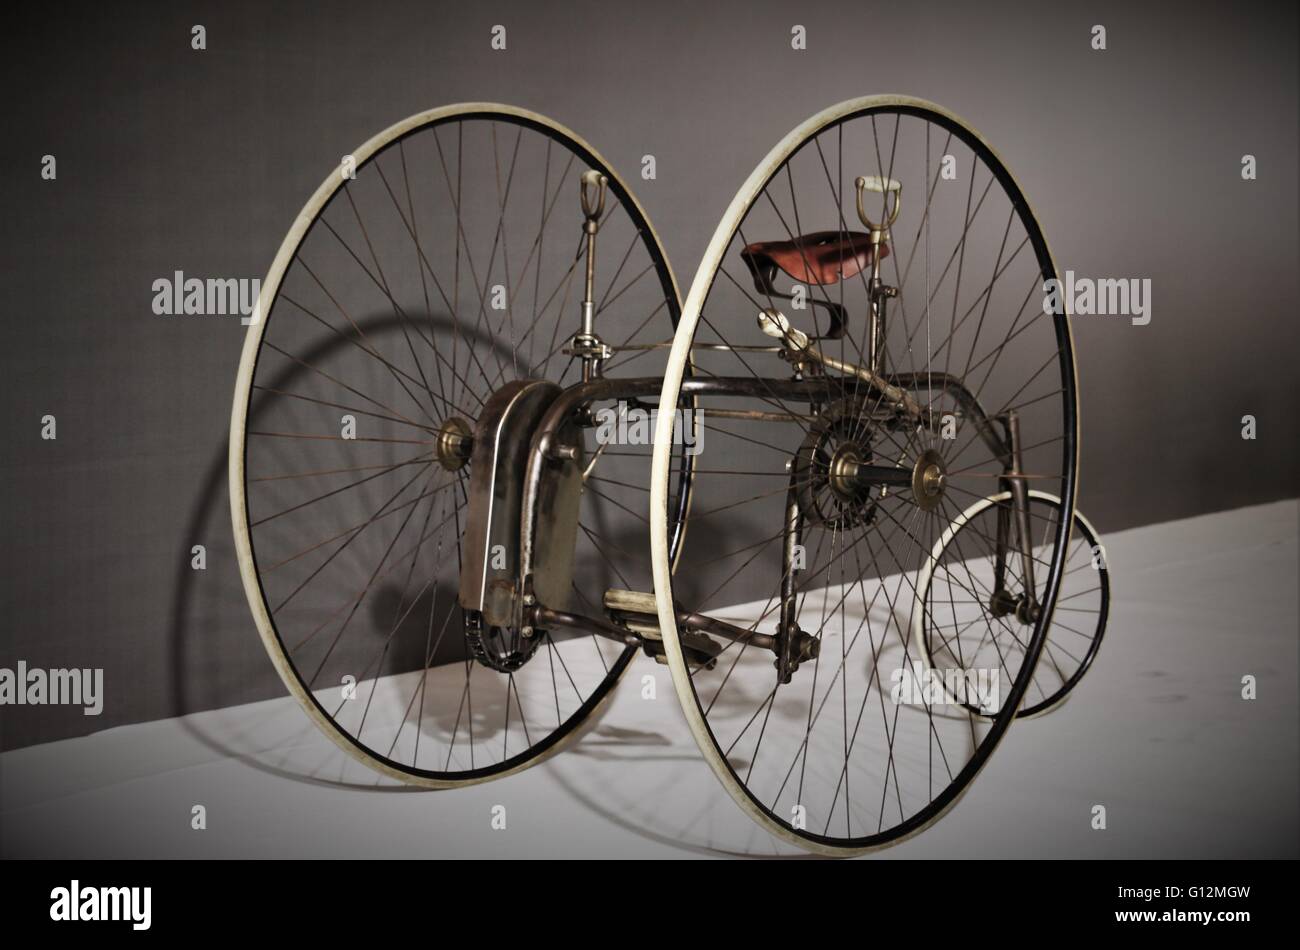 Vintage bicycle (Antique bike)with big wheels.Gray background. Captured in Shanghai formula one exhibition, China, April 2016. Stock Photo